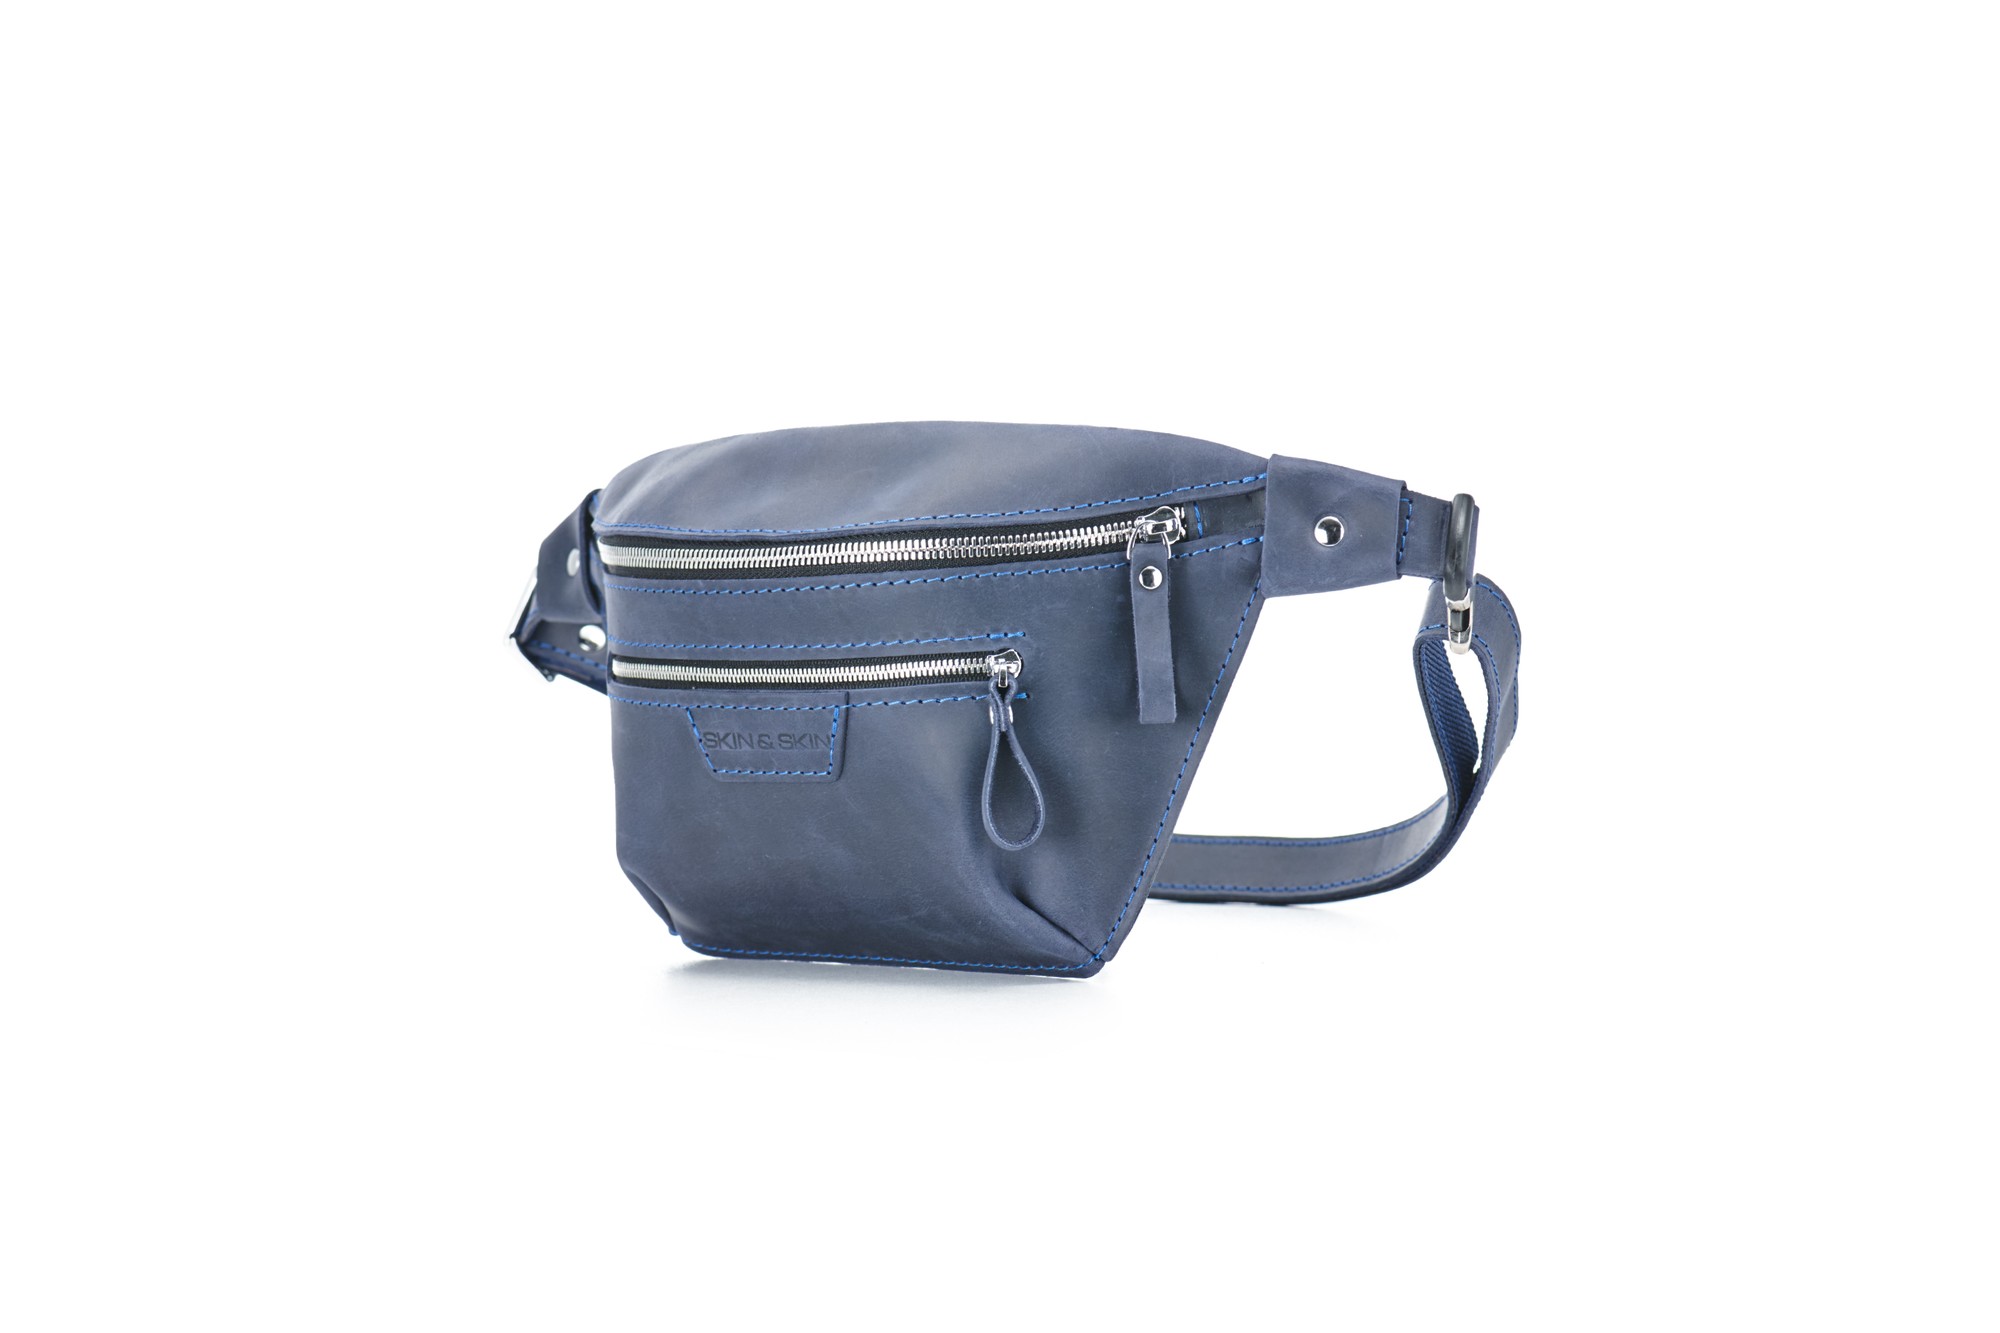 Unisex bum&belt bag, travel crossbody hip pouch, casual fanny pack,  festival sling bag - 40532 from Skin and Skin with donate to u24